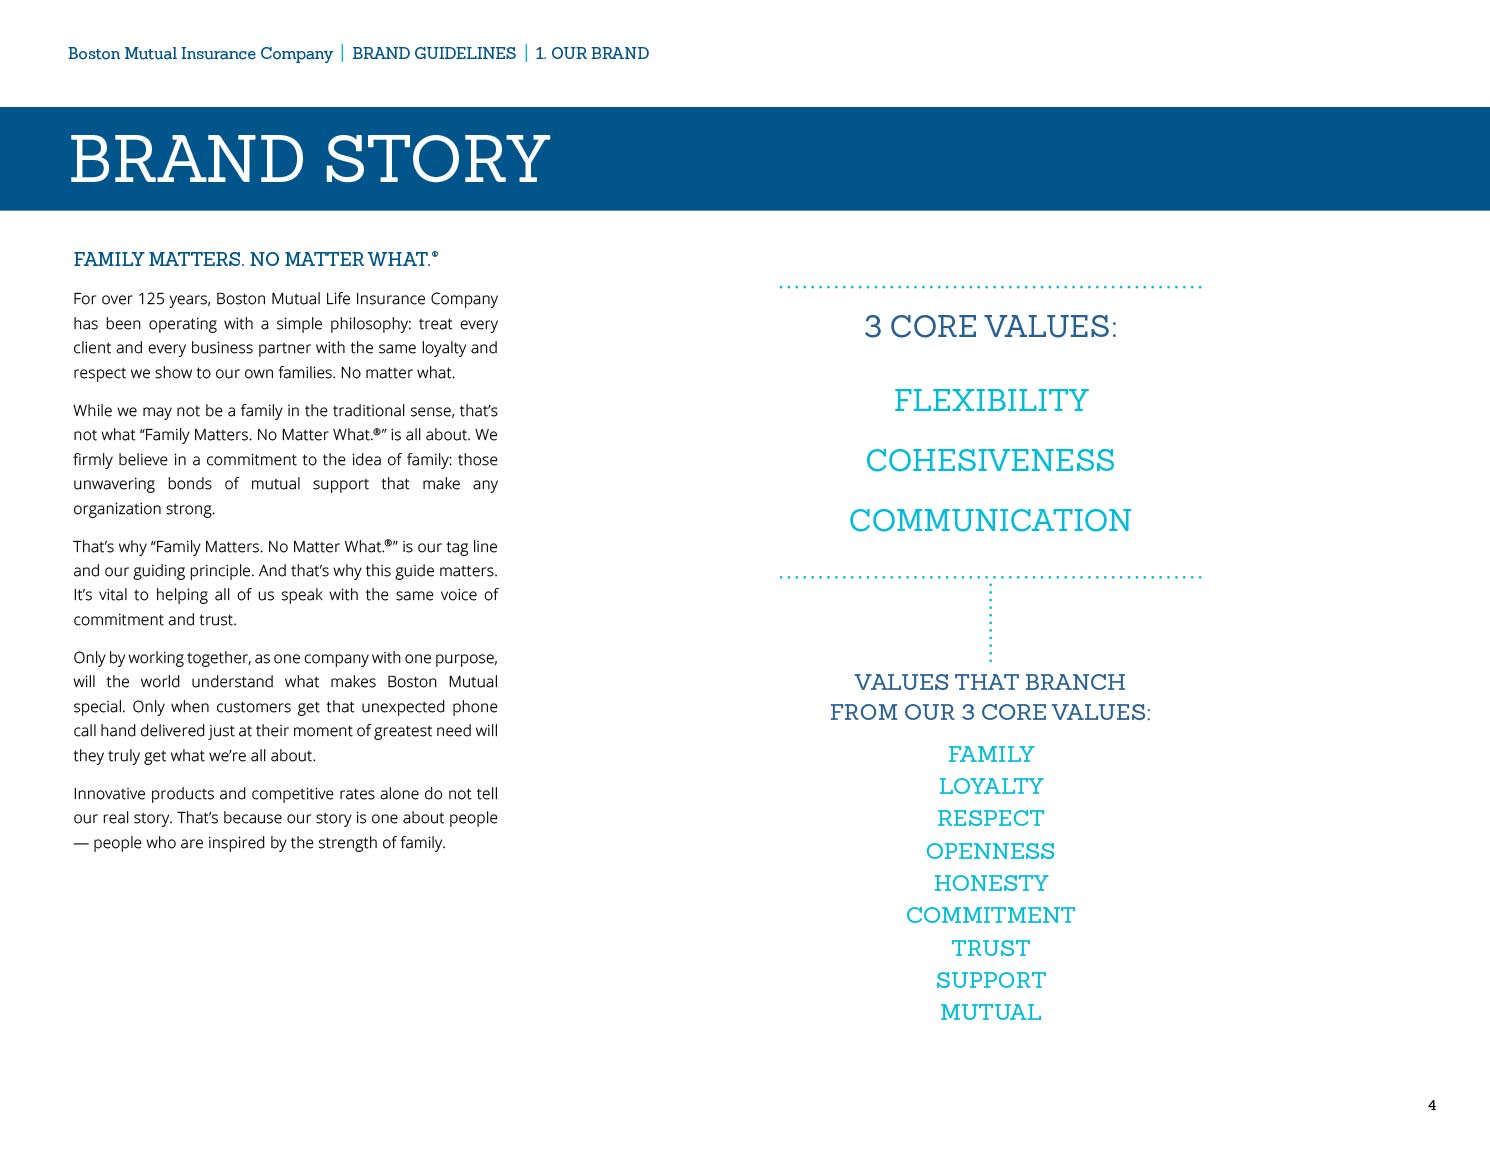 boston mutual brand guide page showing brand story